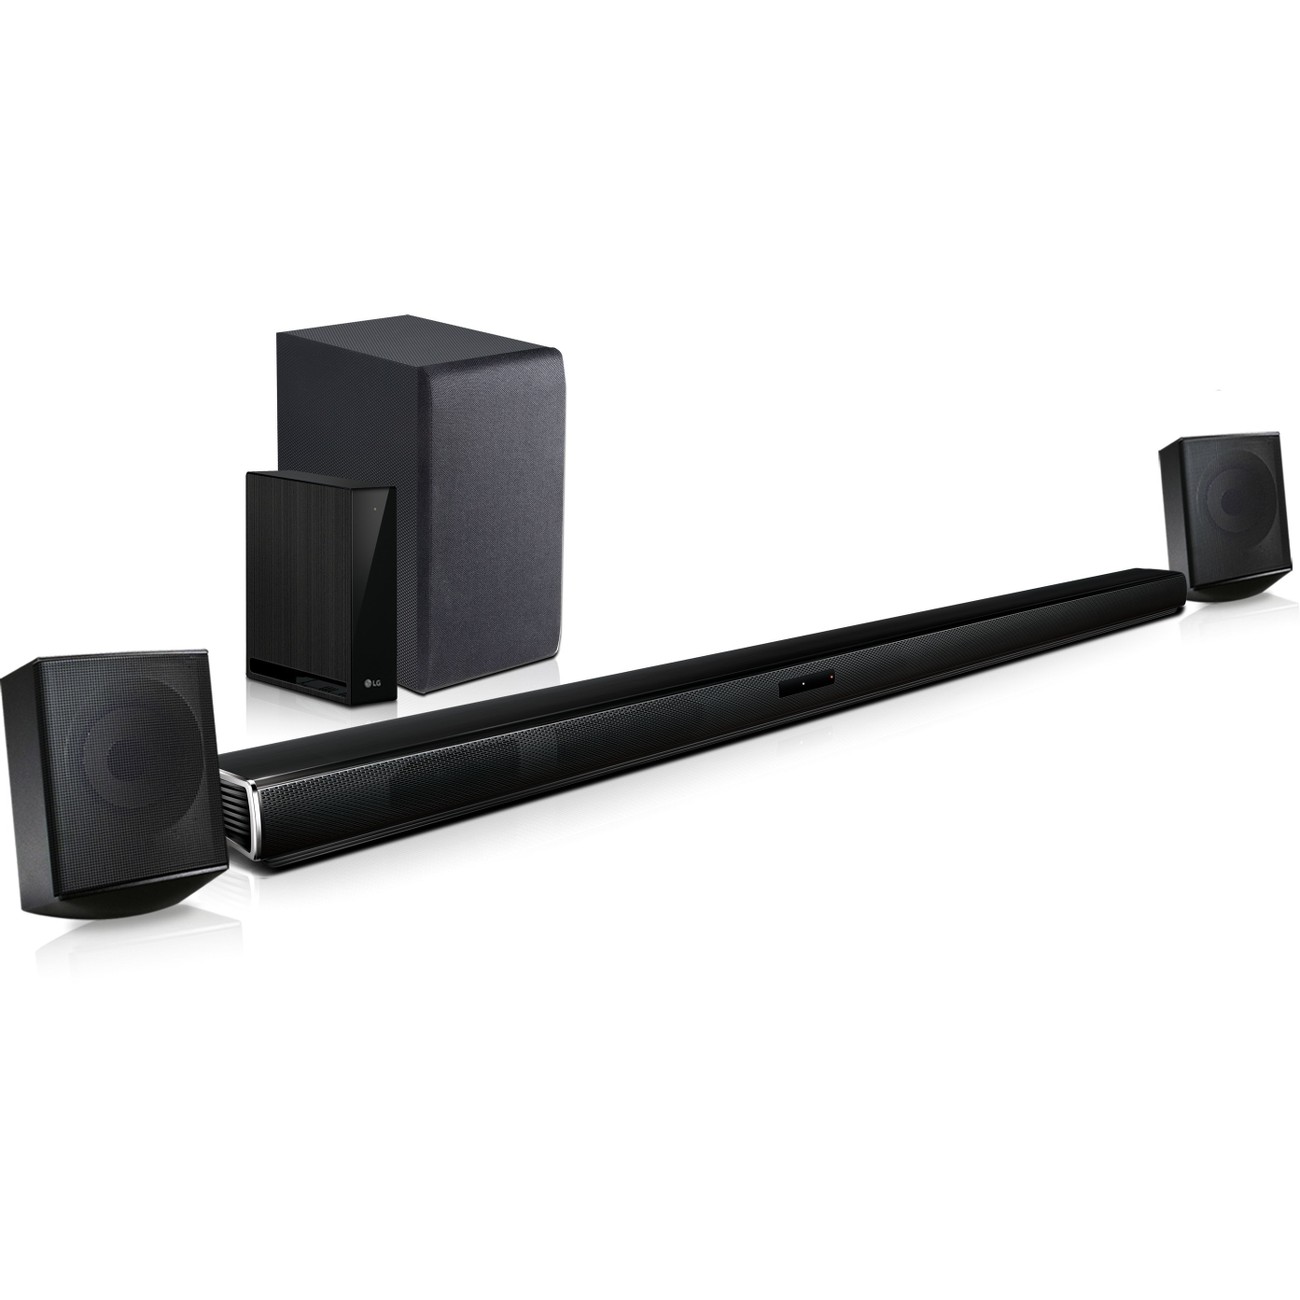 LG 4.1 Channel Soundbar Surround System with Wireless Subwoofer - SJ4R - image 2 of 6